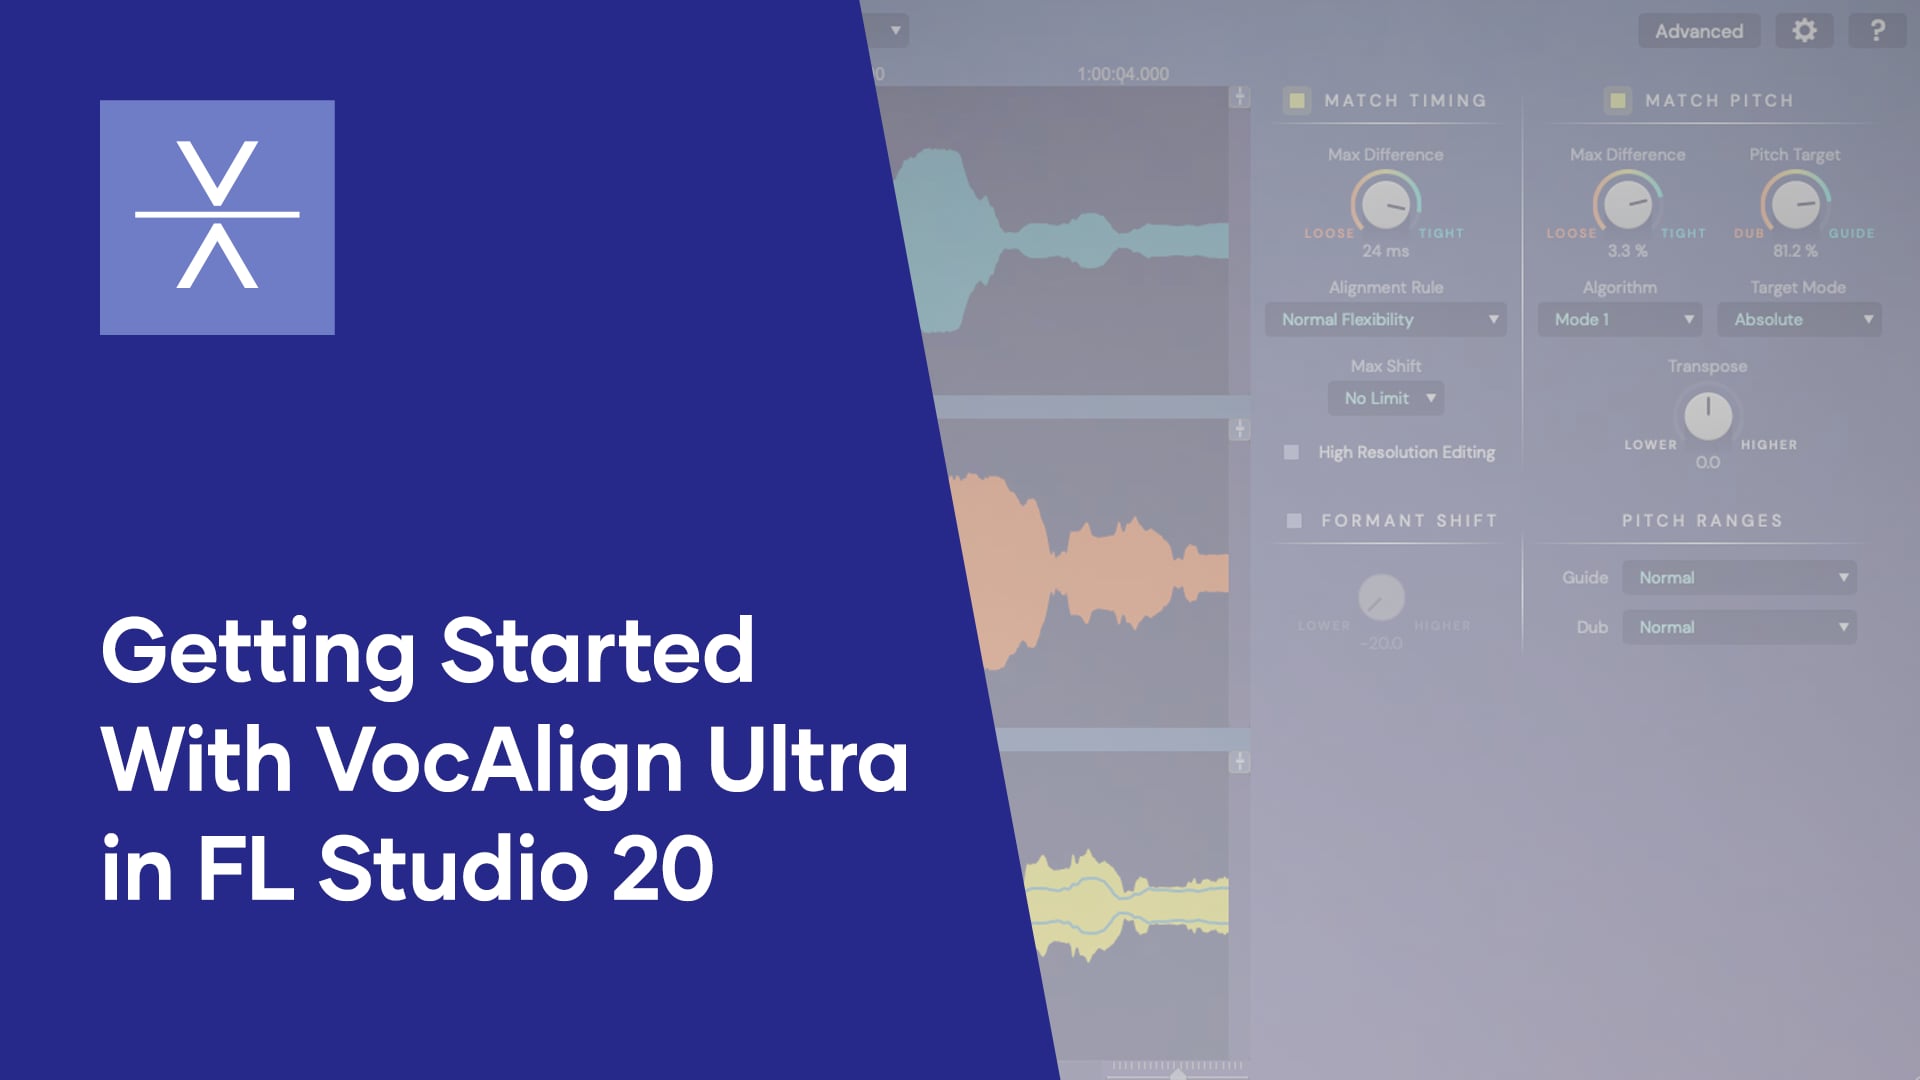 Getting Started With VocAlign Ultra in FL Studio 20 on Vimeo